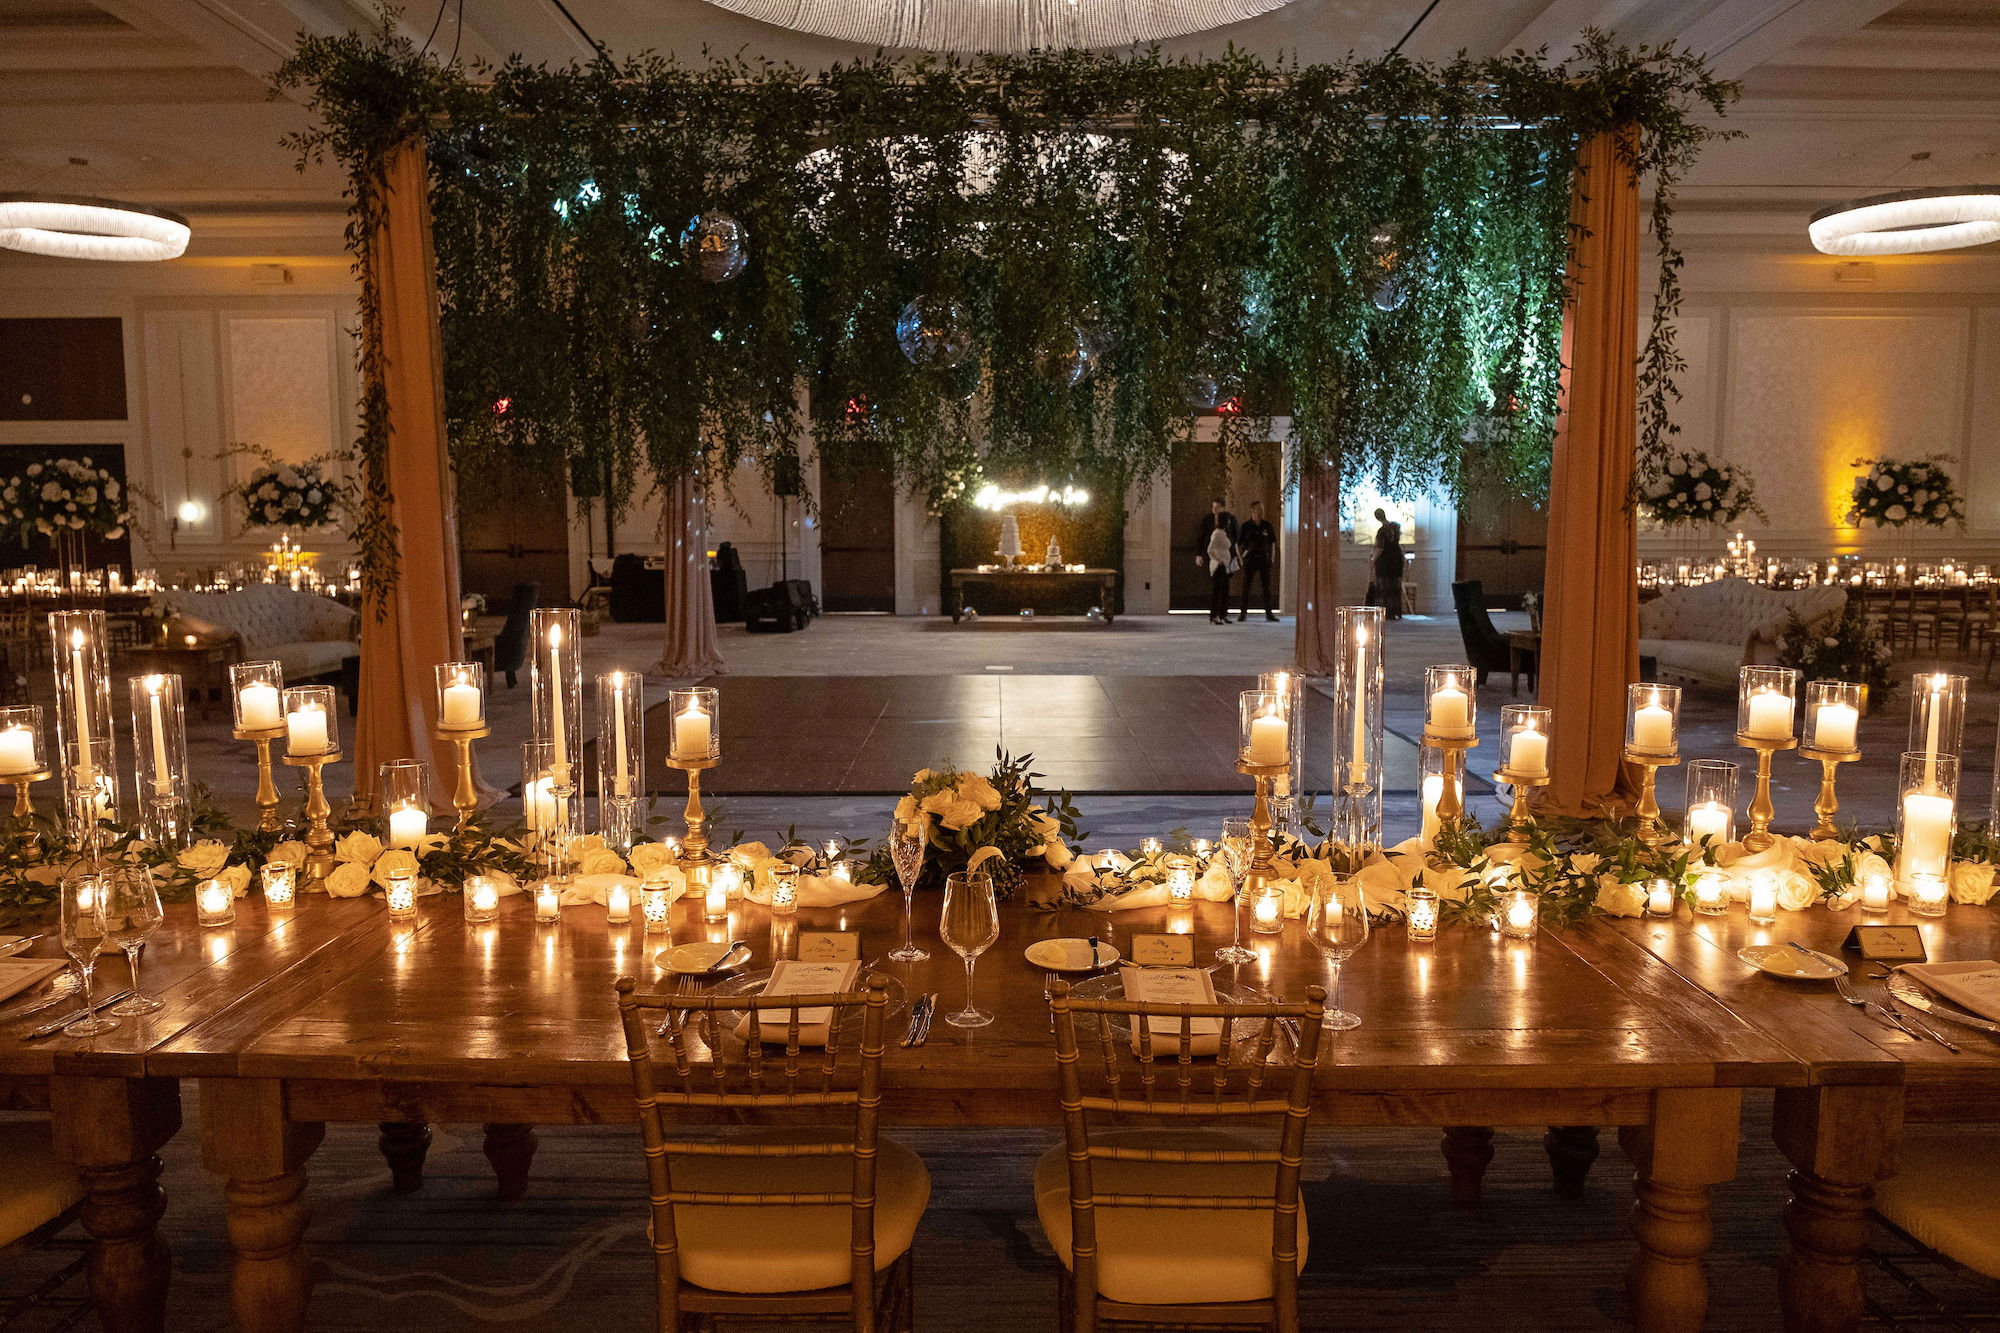 Greenery Floral Chandelier | Whimsical Candlelit Centerpieces | Gold Chiavari Chairs | Tampa Bay Wedding Rental Company A Chair Affair